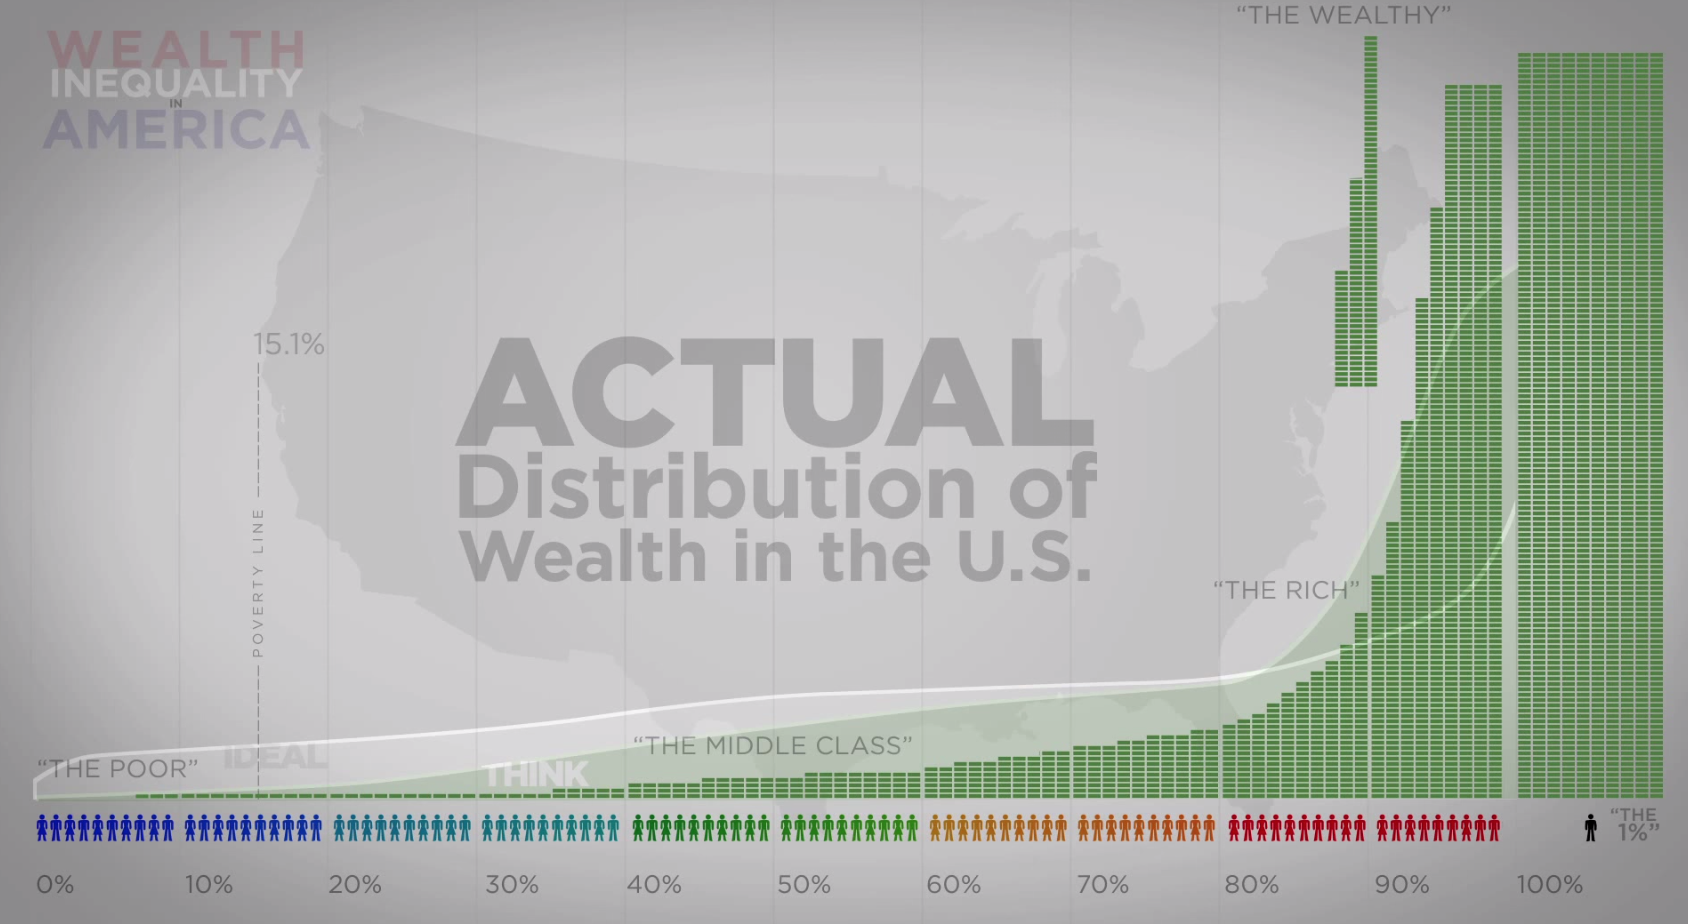 image of inequal wealth distribution in the USA